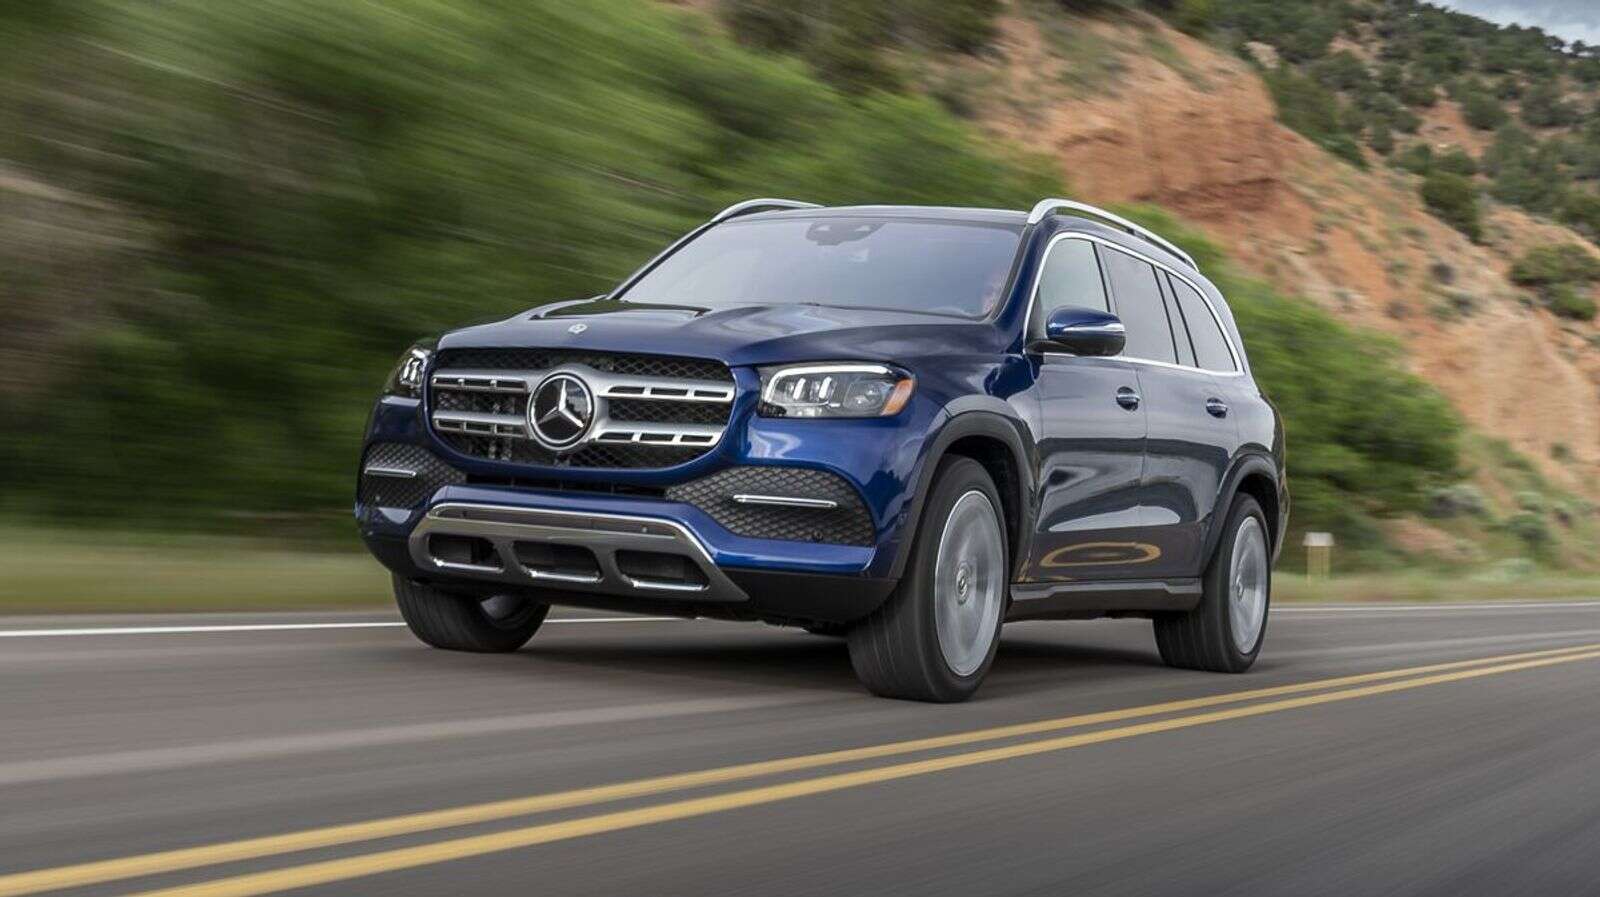 uae: mercedes-benz to recall over 2,500 suvs over transmission issue